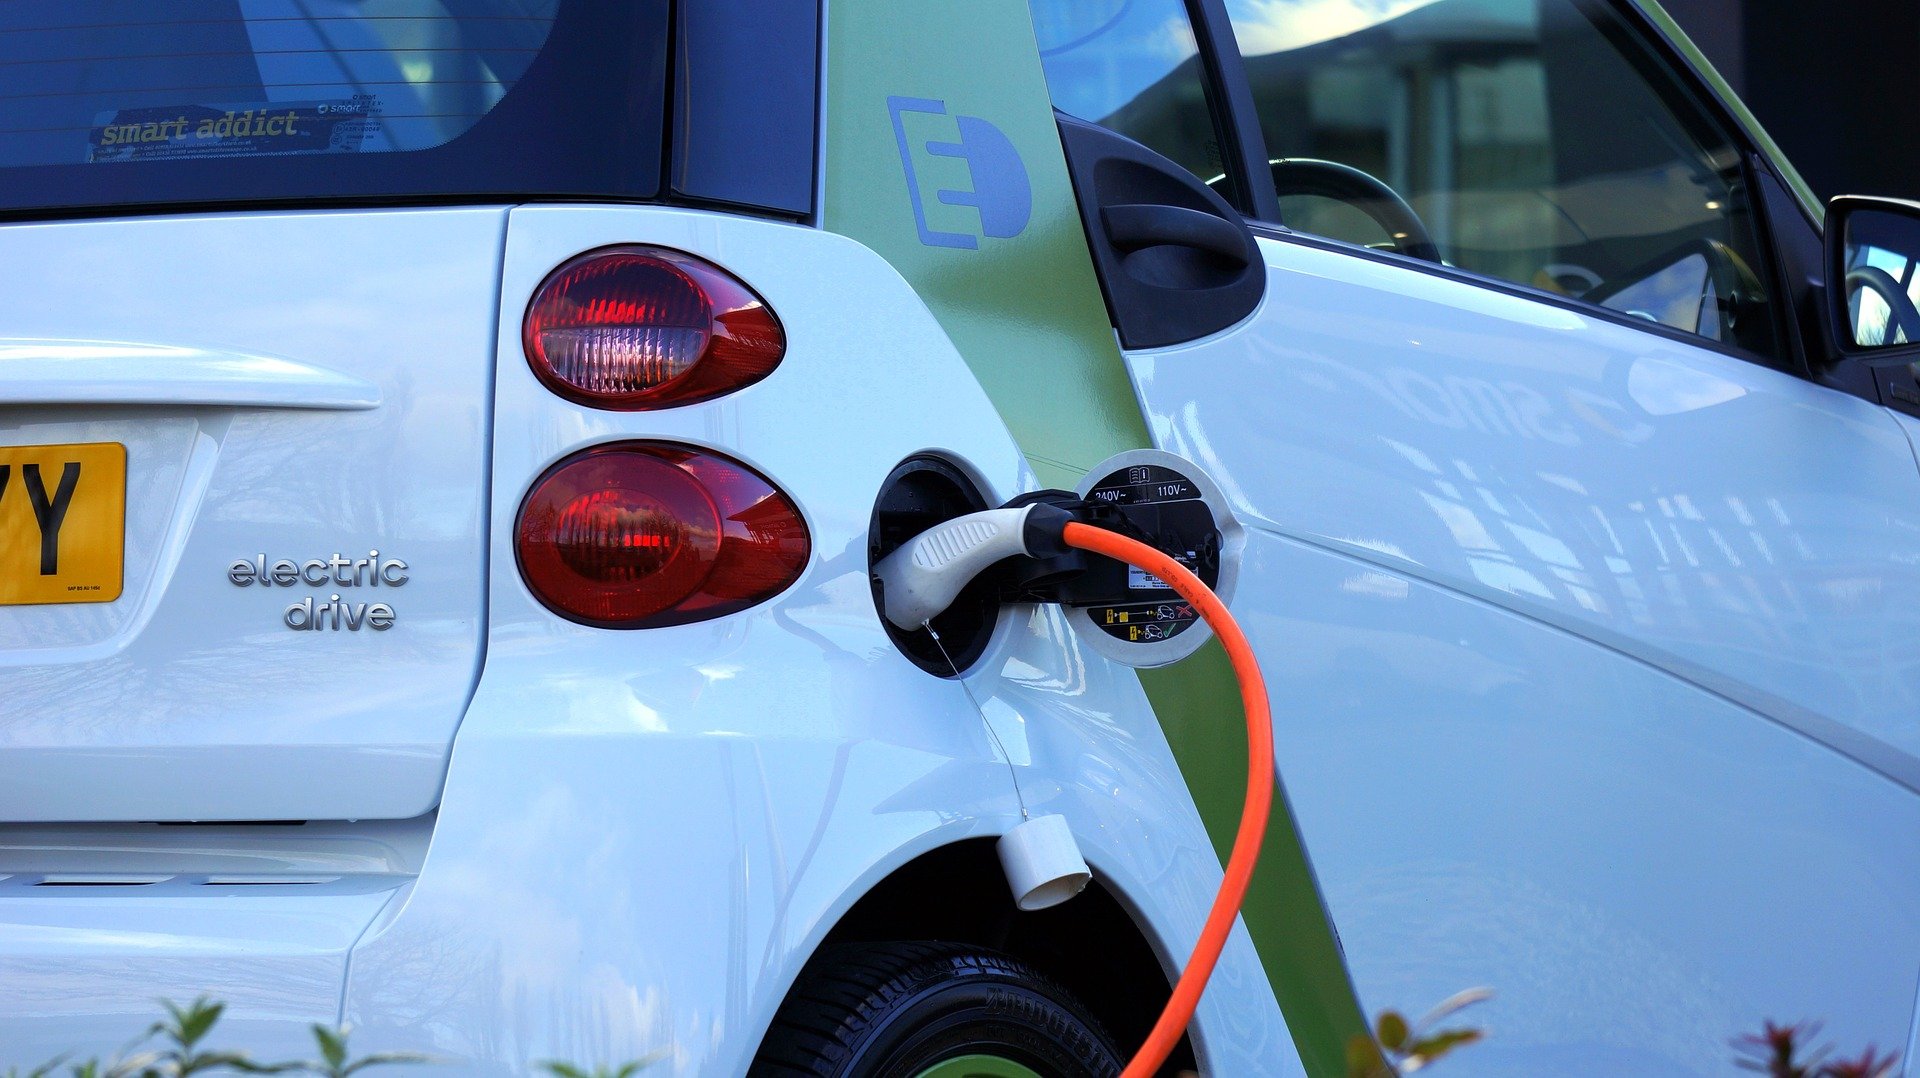 Electric Car Sales in Israel Expected to Double to 19,000 in Next Year